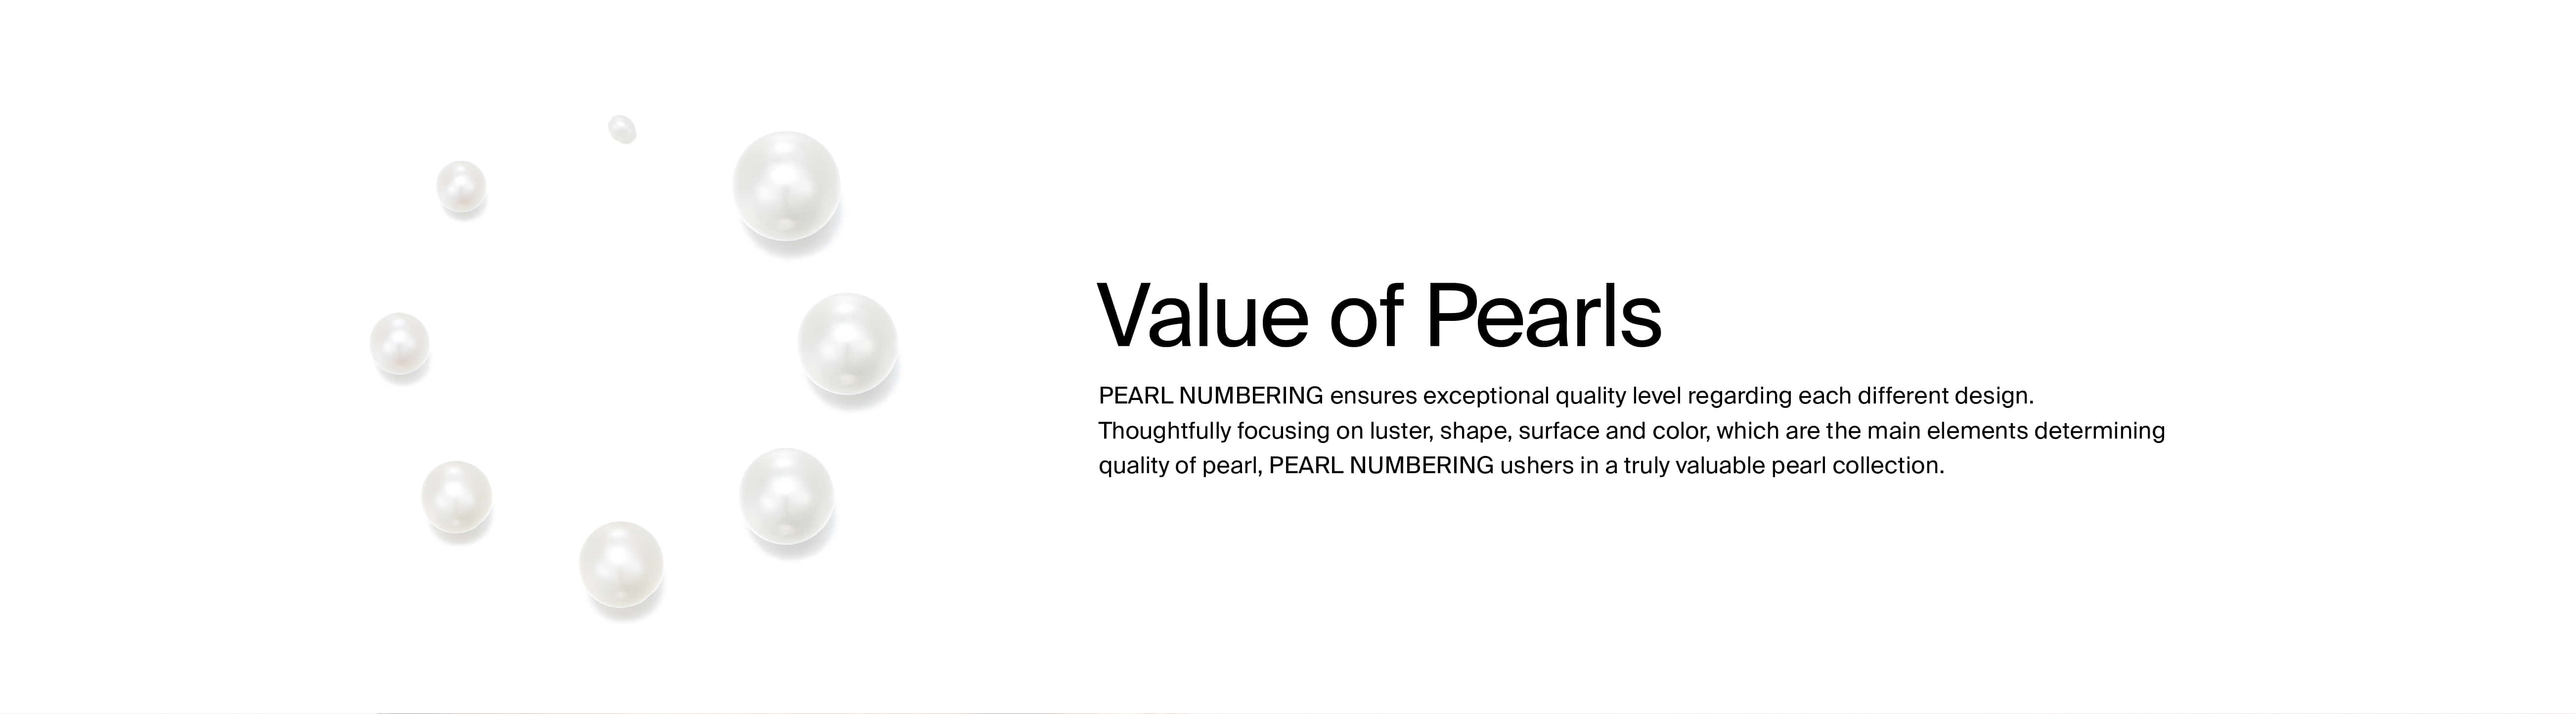 value_of_pearls